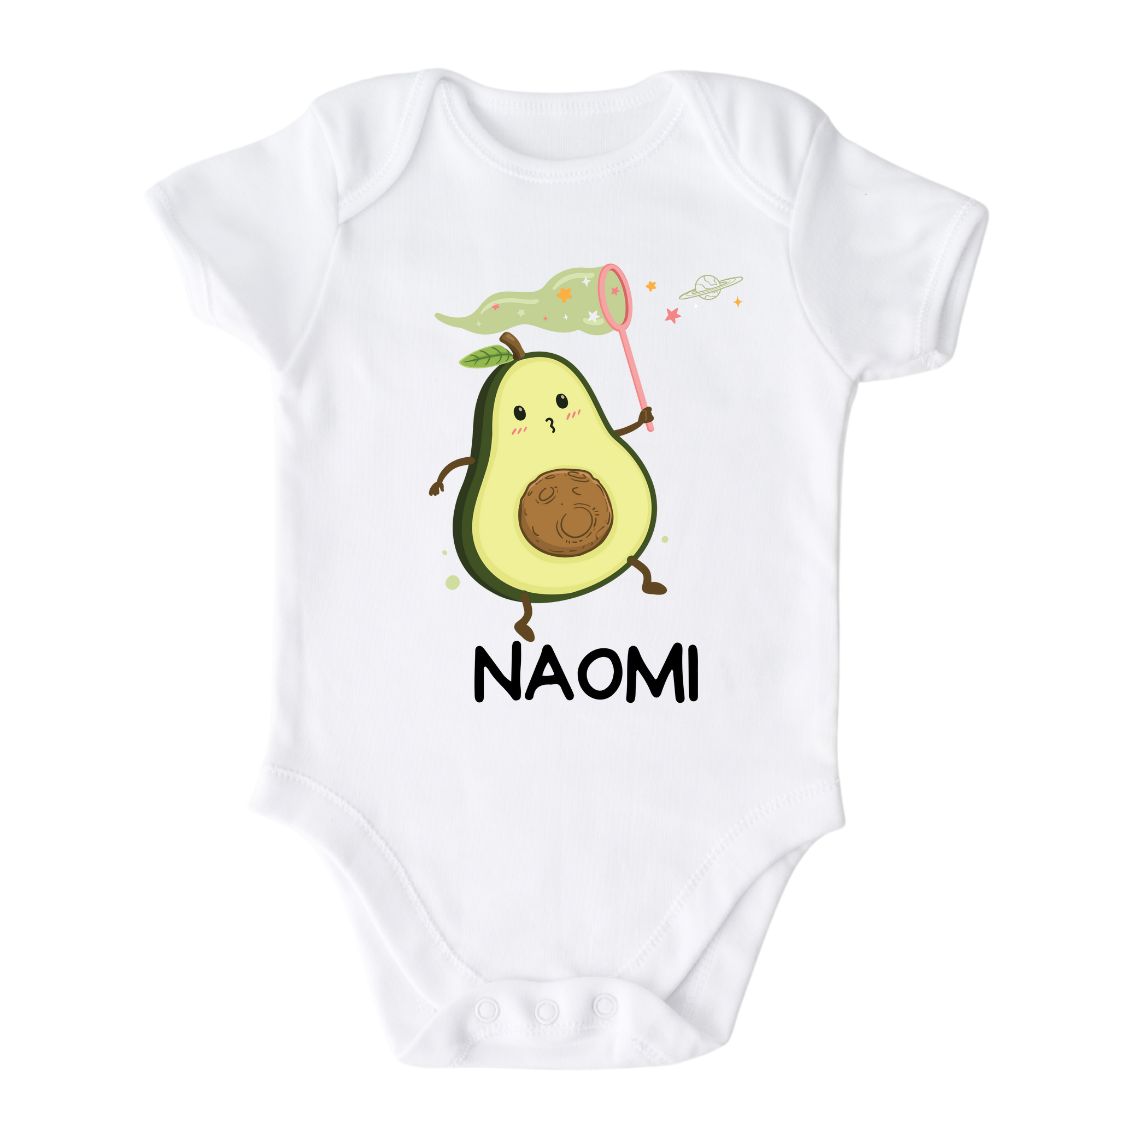 Baby Onesie, Cute Baby Gift for Newborn Clothes for Baby Bodysuit with a cute avocado catching stars design, customizable with names.